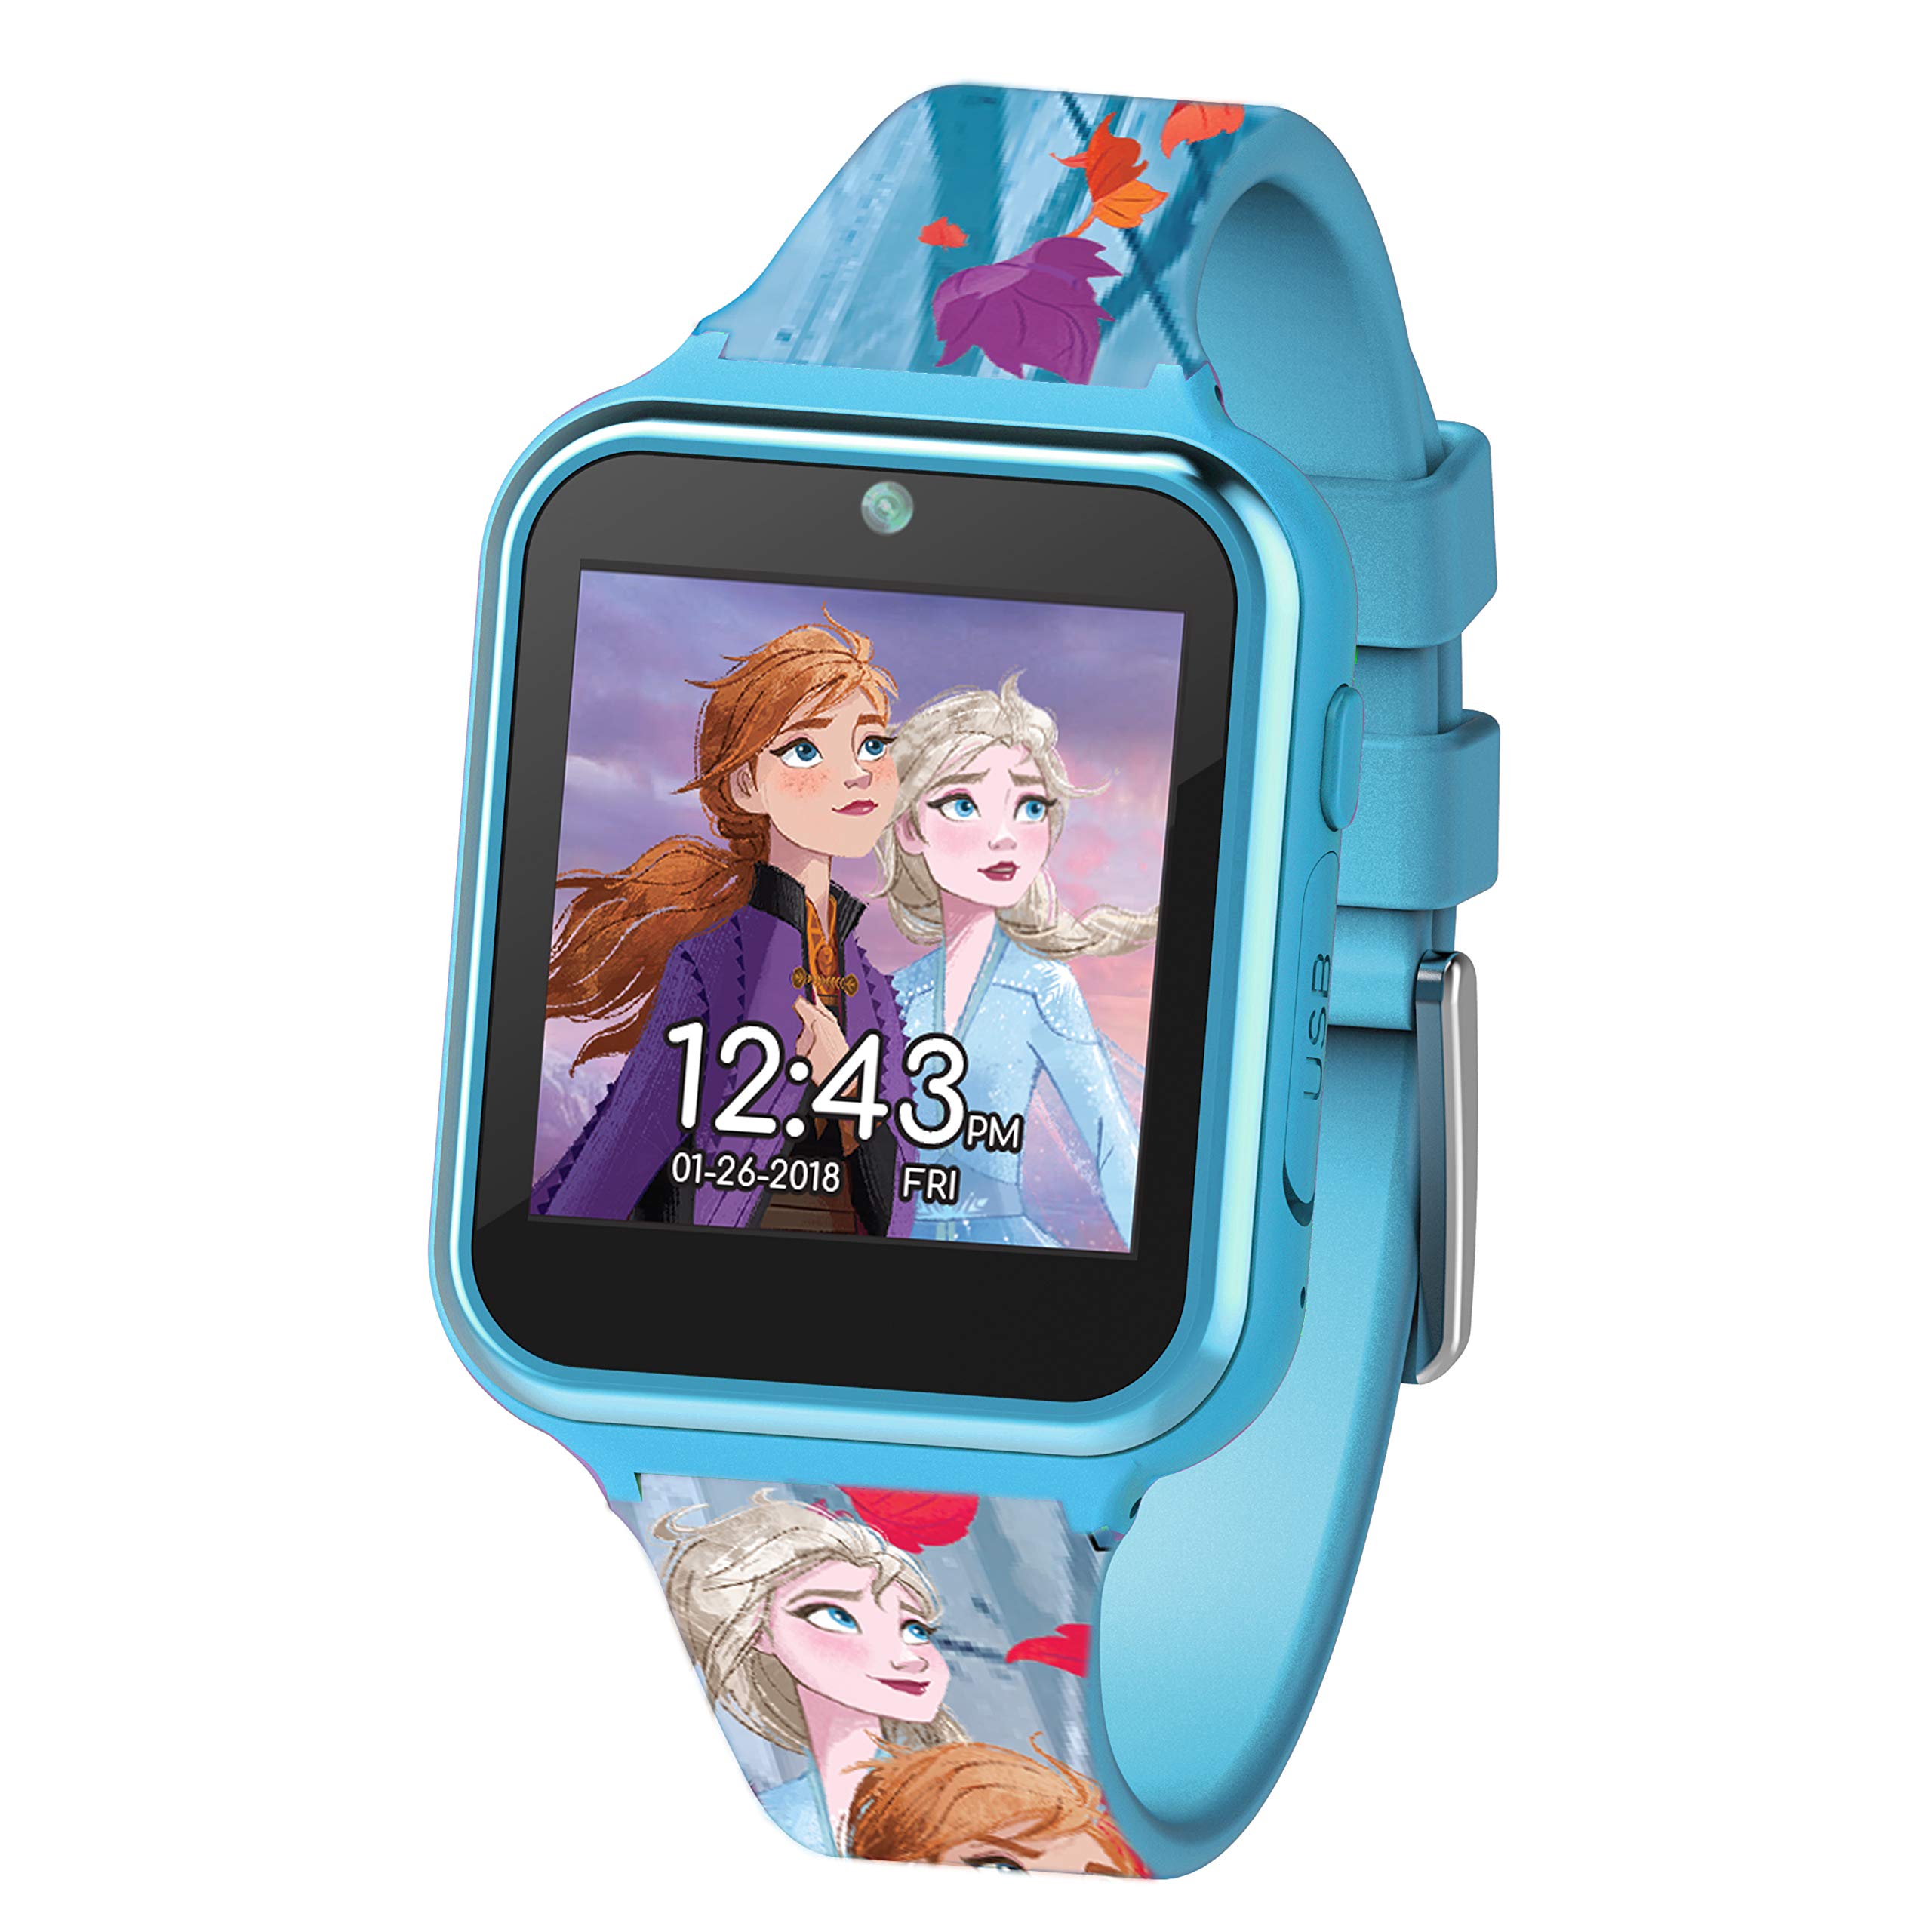 Accutime Kids Disney Frozen Smart Watch with Camera for Kids and Toddlers - Interactive Smartwatch for Boys & Girls with Games, Voice Recorder, Calculator, Pedometer, Alarm, Stopwatch